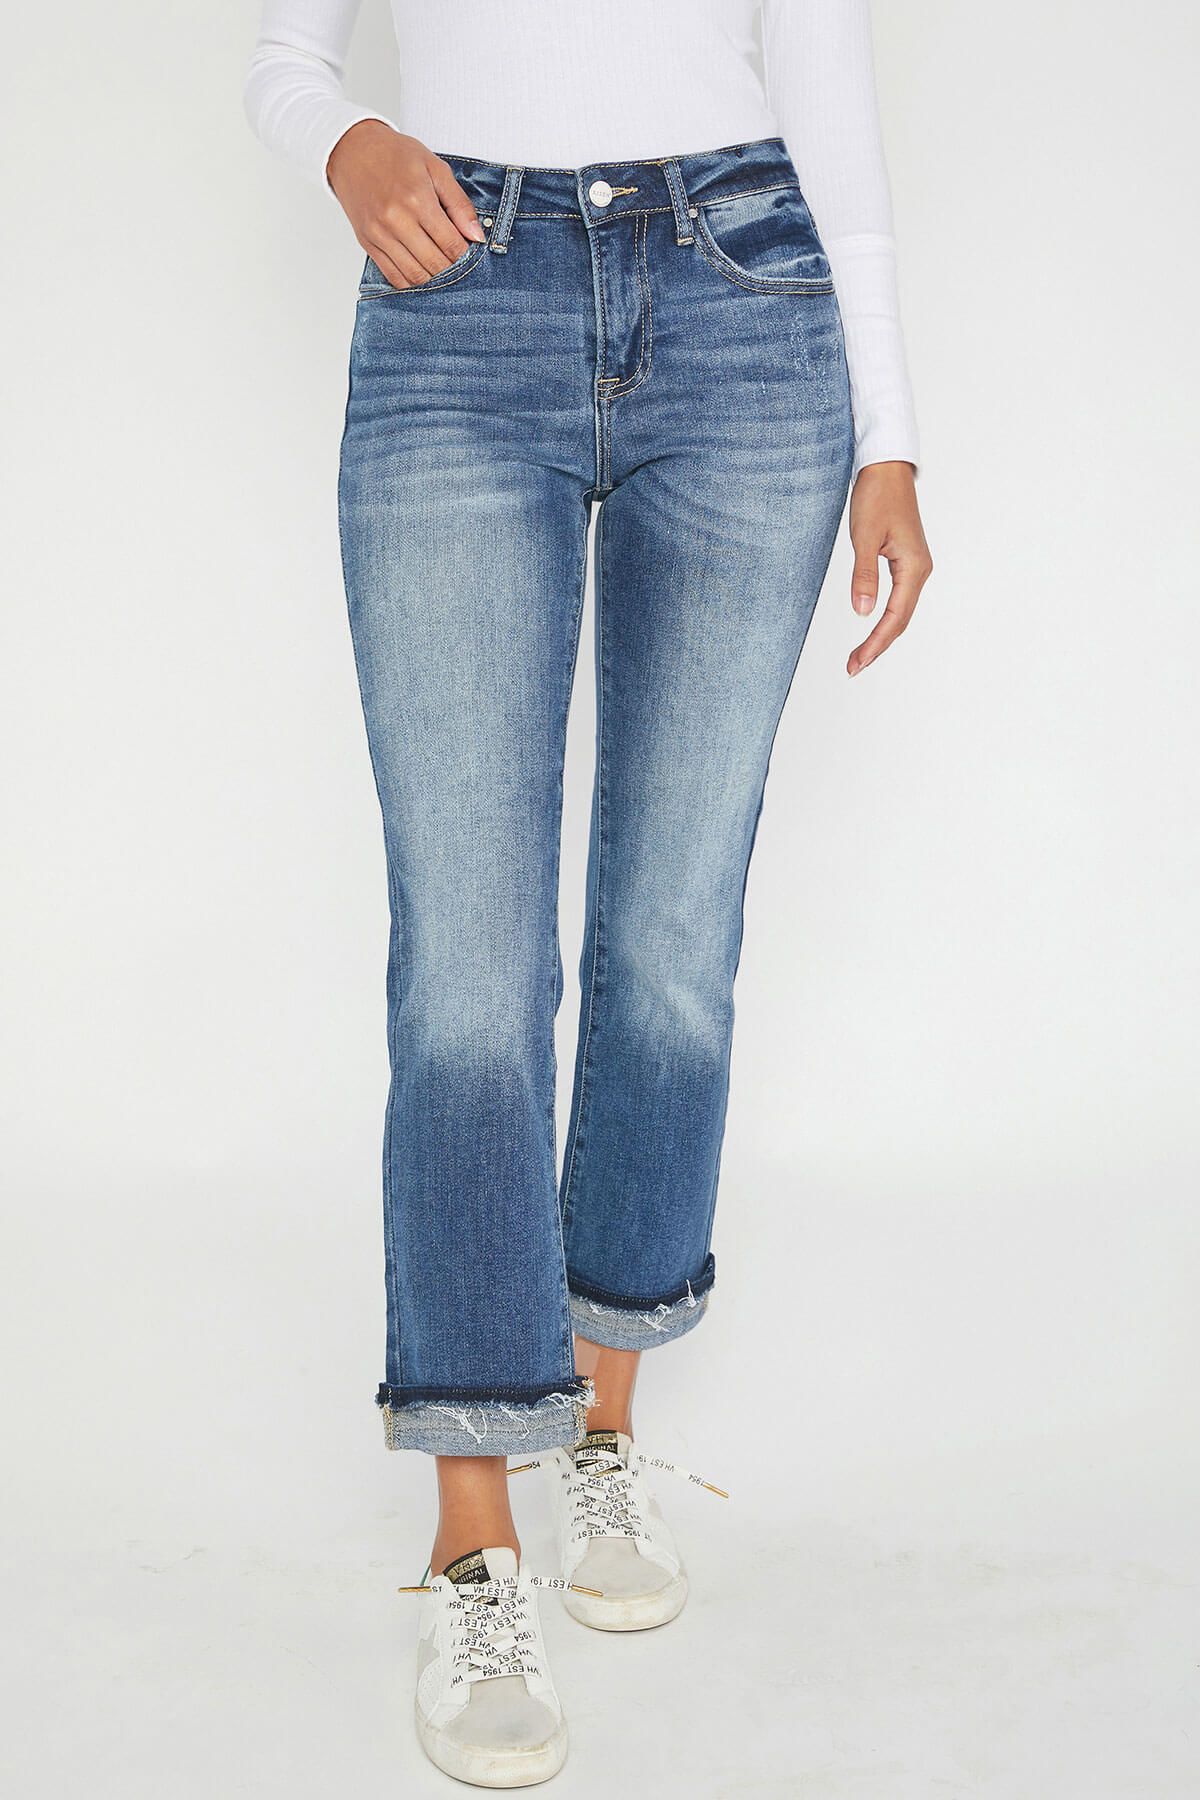 Risen Off The Cuff Jeans | Social Threads